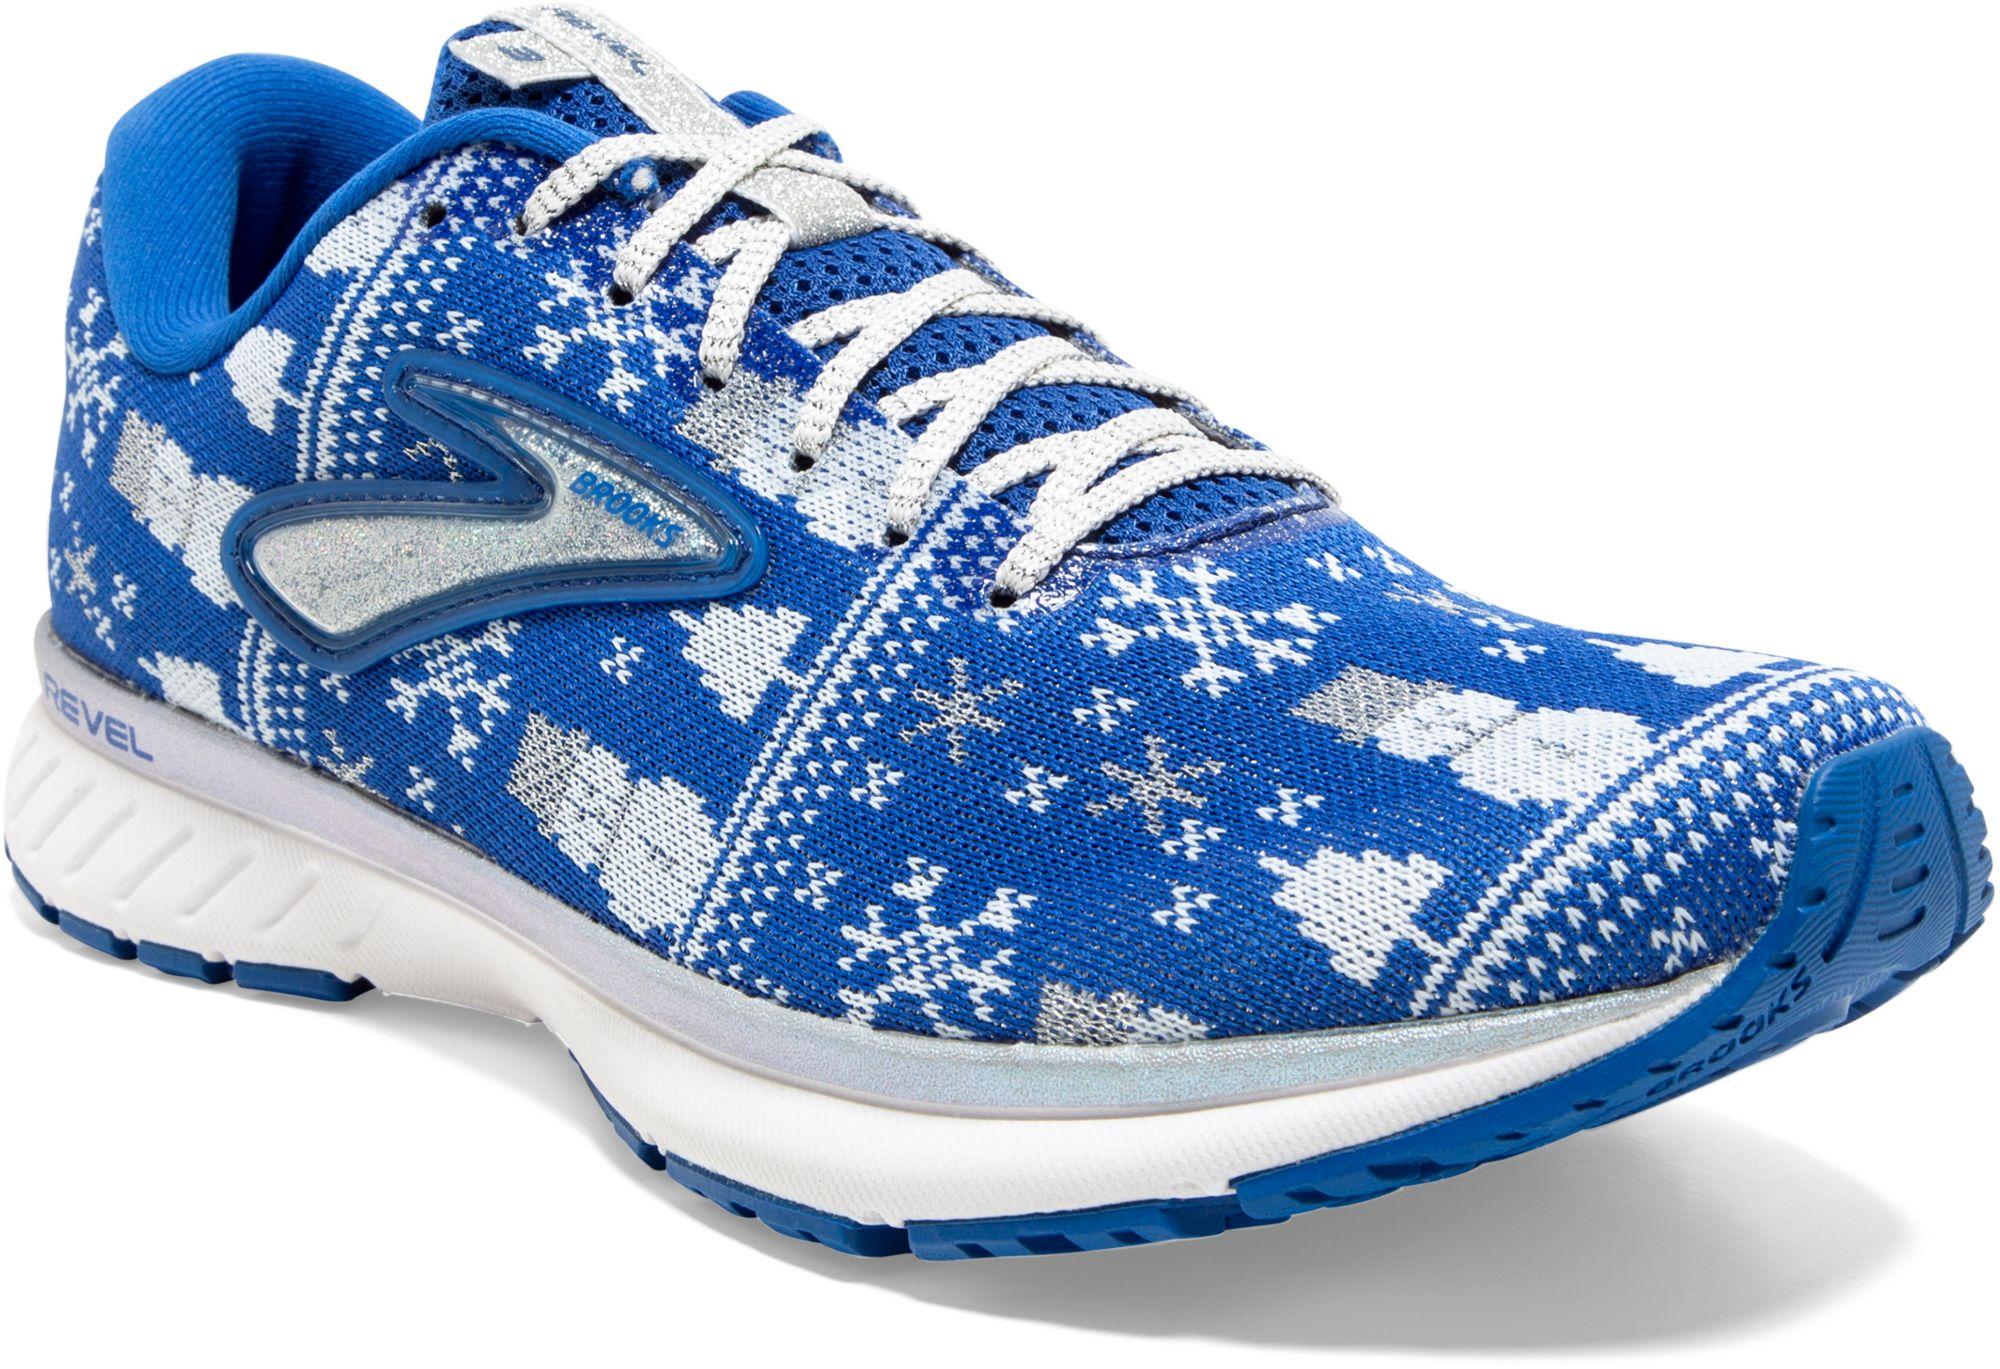 Brooks Rubber Revel 3 Run Merry Running Shoes in Blue/Silver (Blue) - Lyst